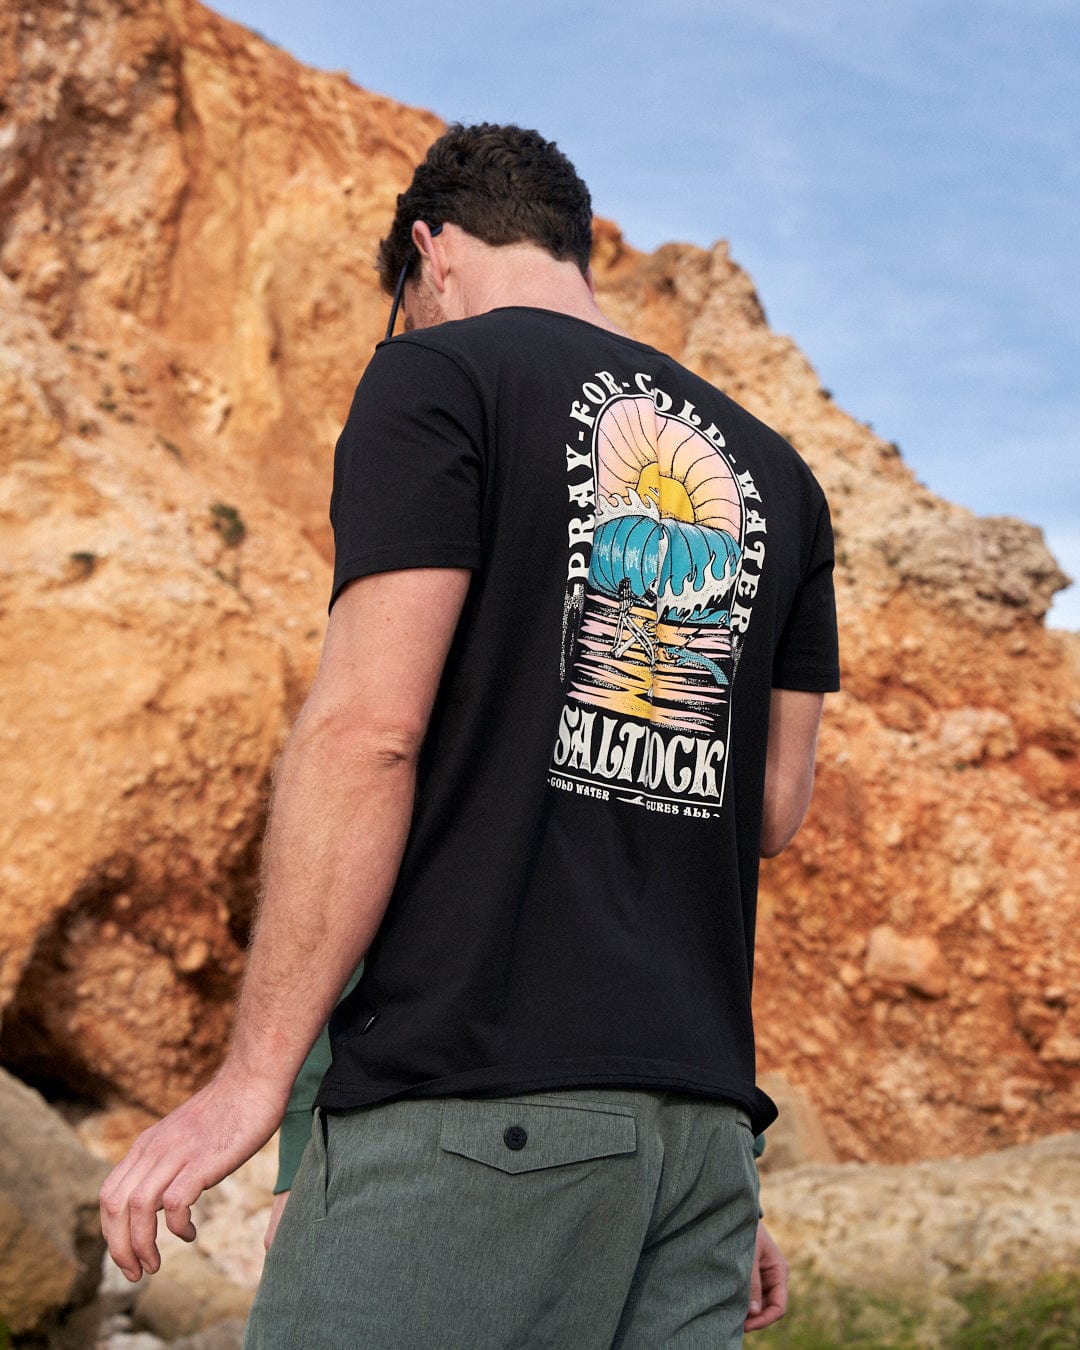 A man wearing a black t-shirt with Saltrock branding is standing on a rock.